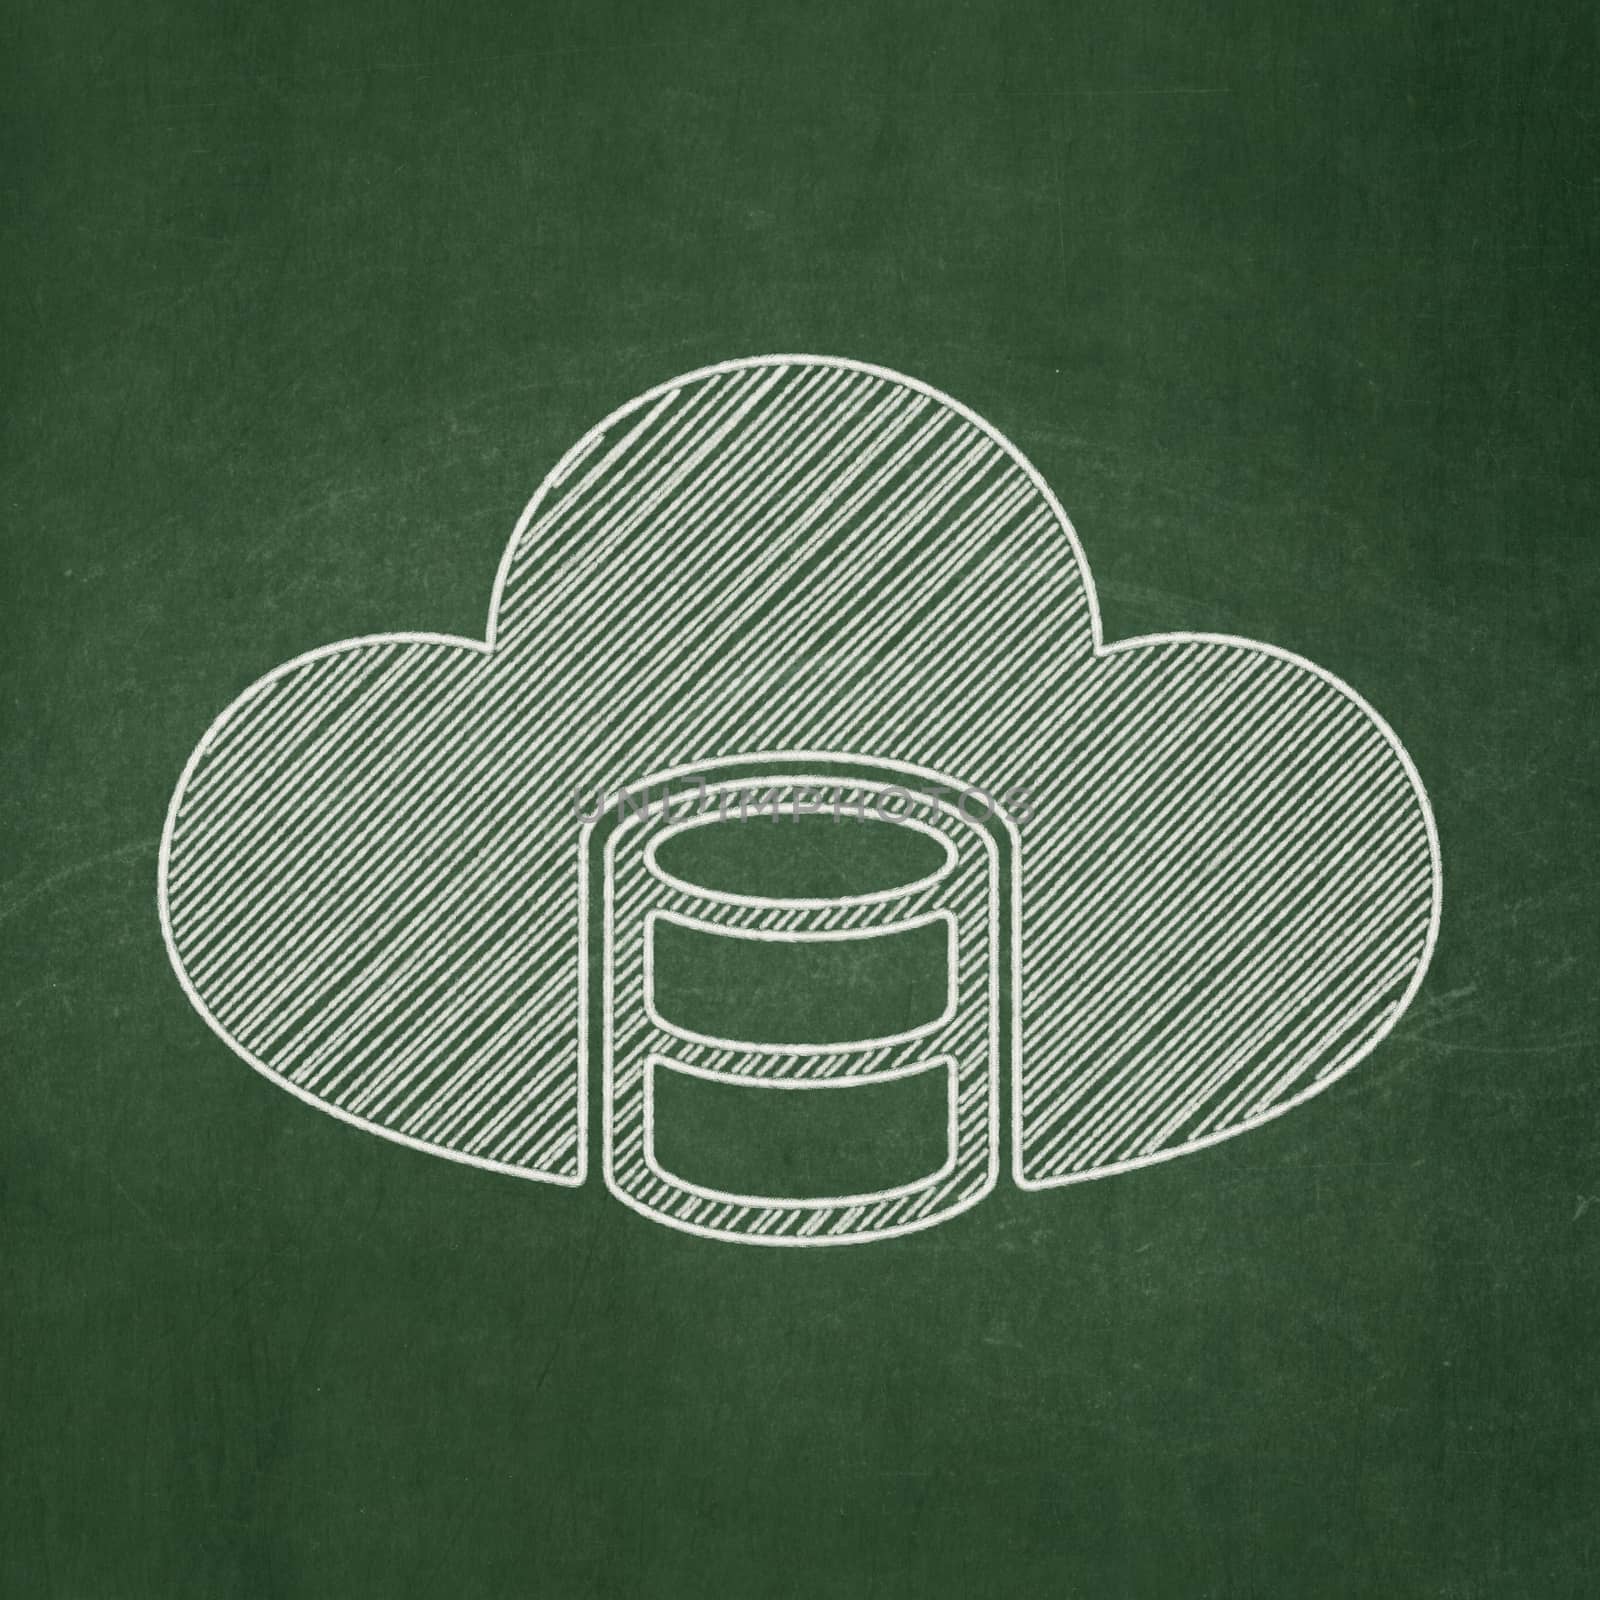 Cloud computing concept: Database With Cloud icon on Green chalkboard background